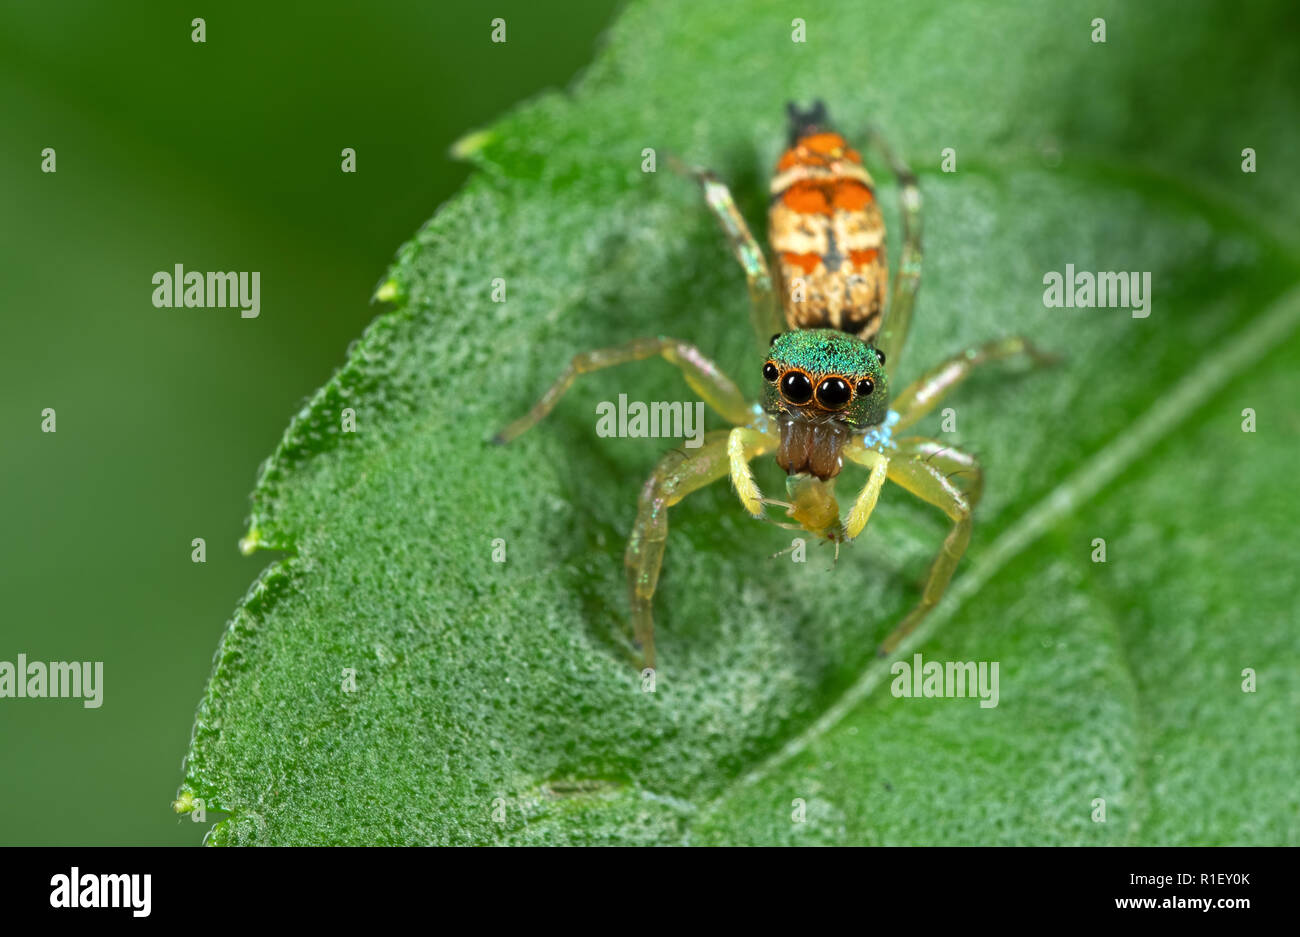 Macro Photography of Colorful Jumping Spider with Prey on Green Leaf Stock Photo